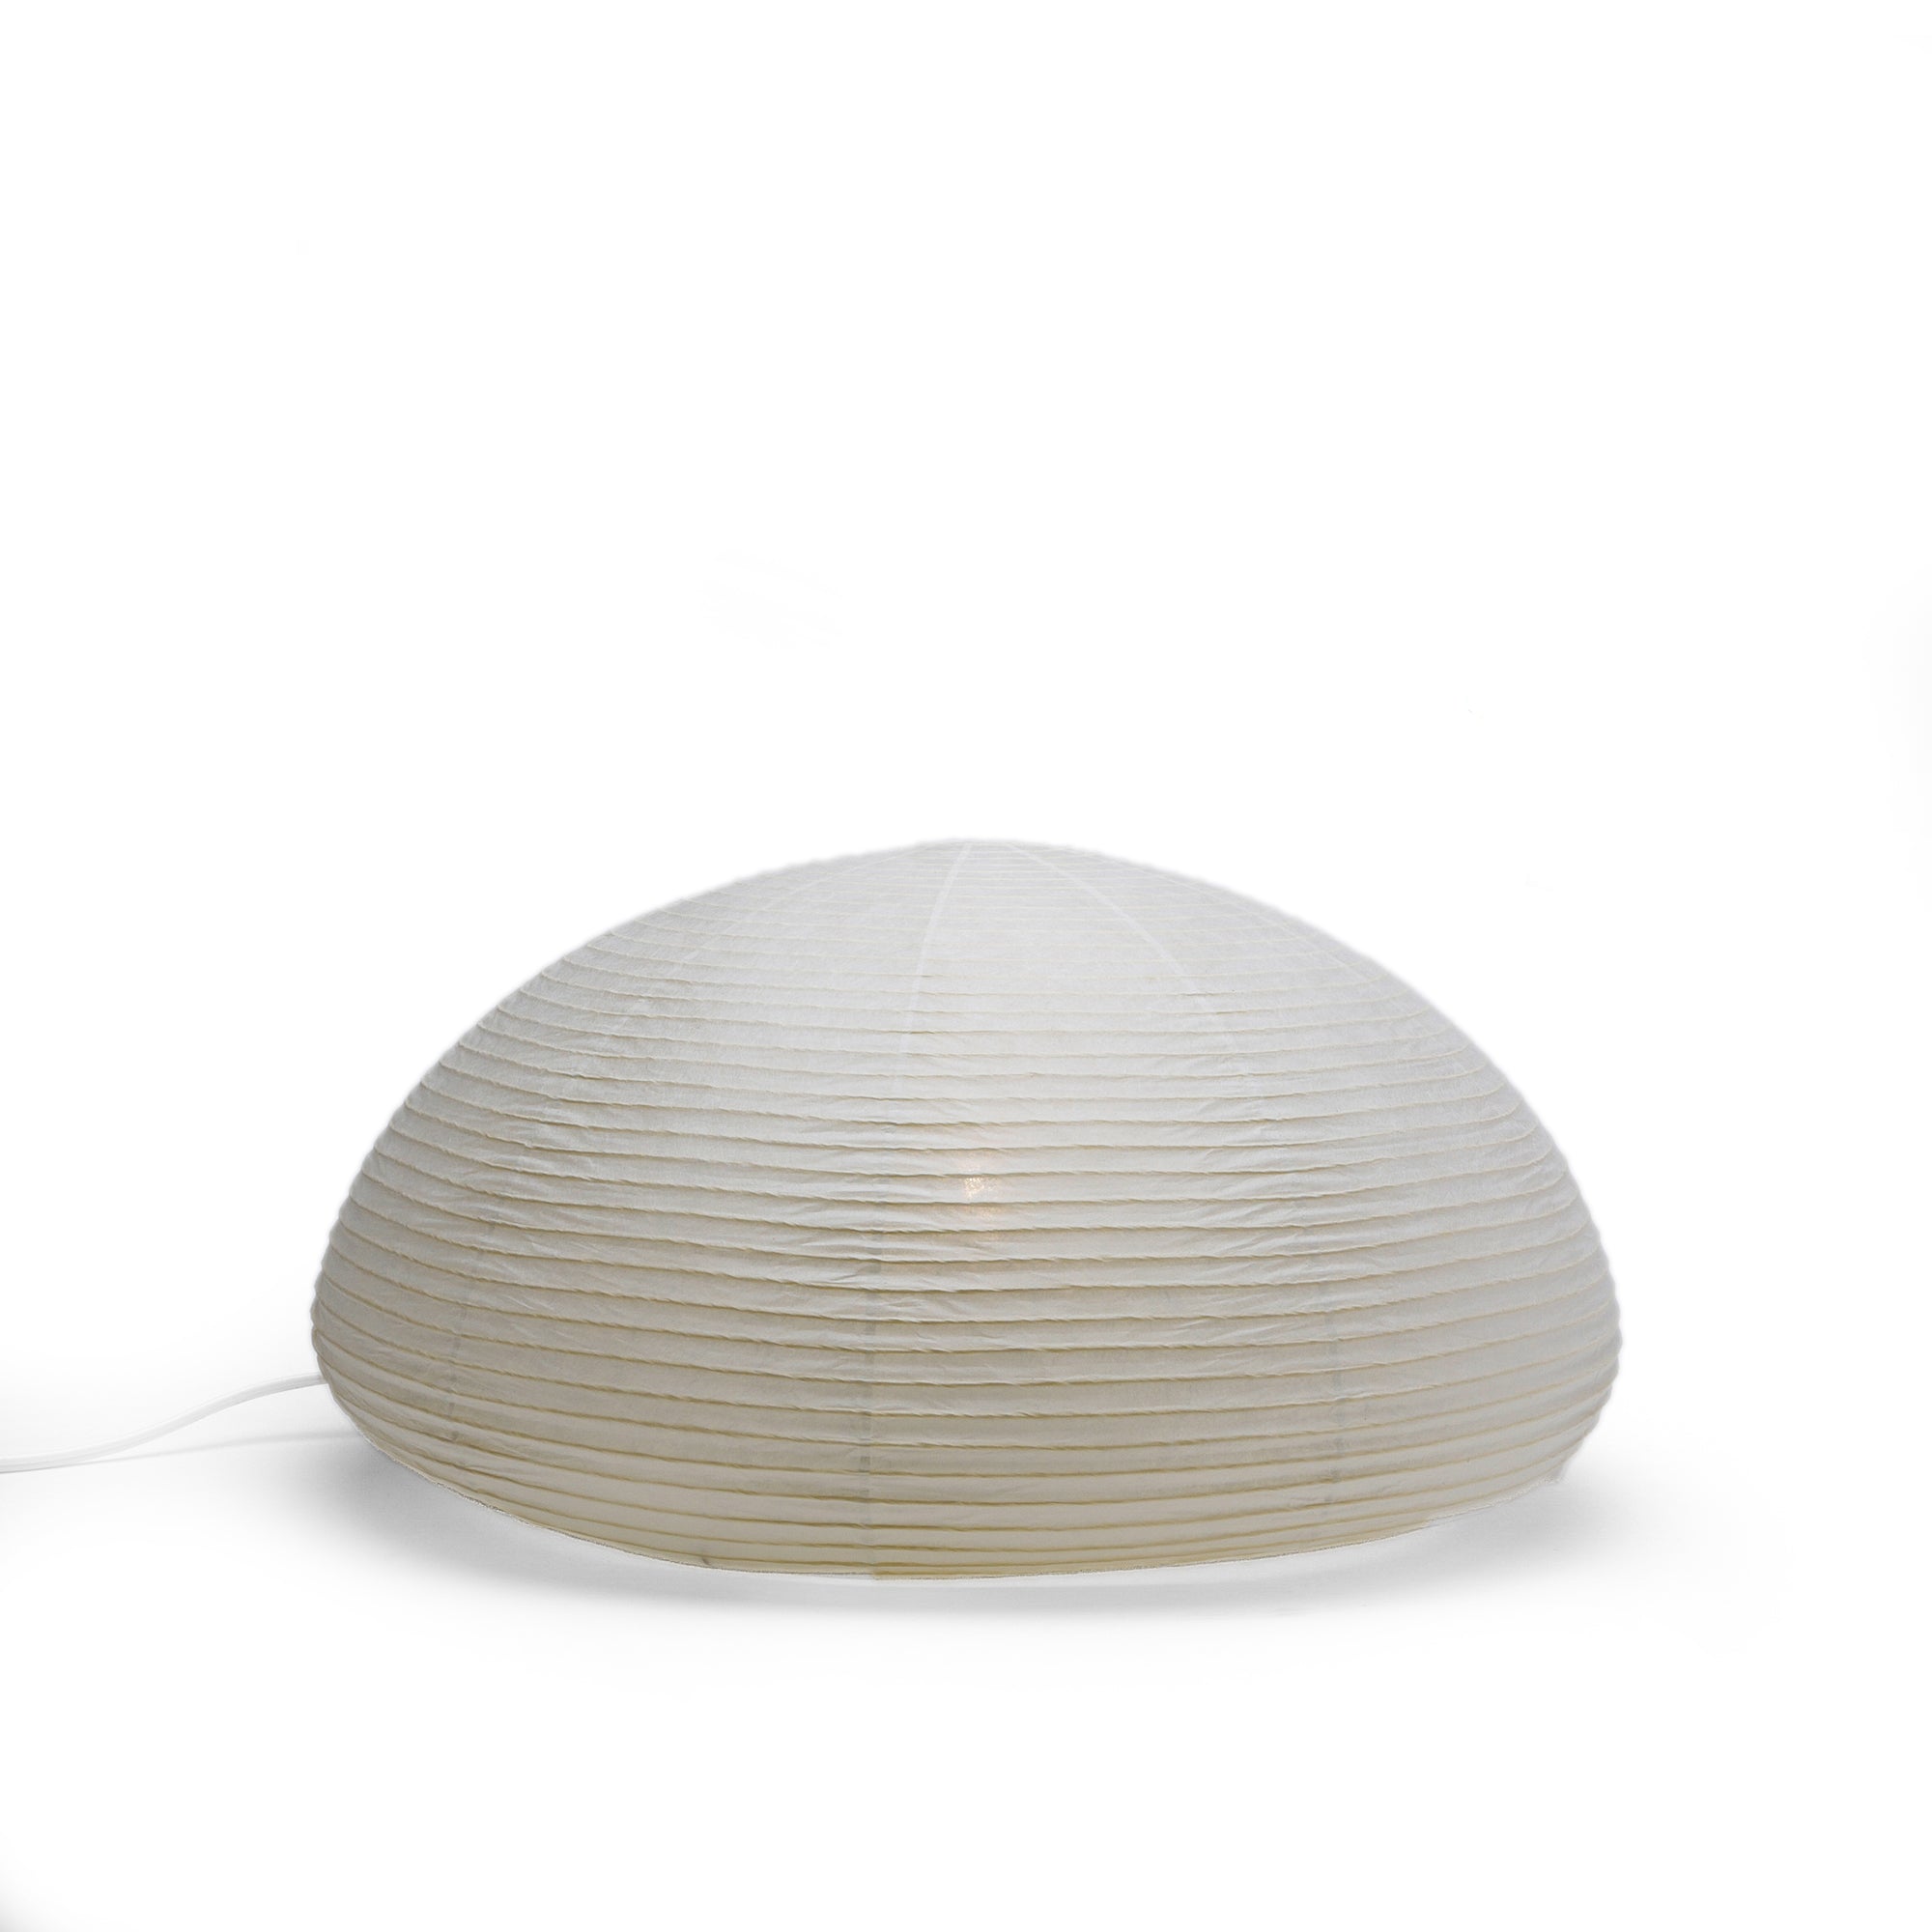 The Saucer - Paper Moon Table Lamp, No. 4